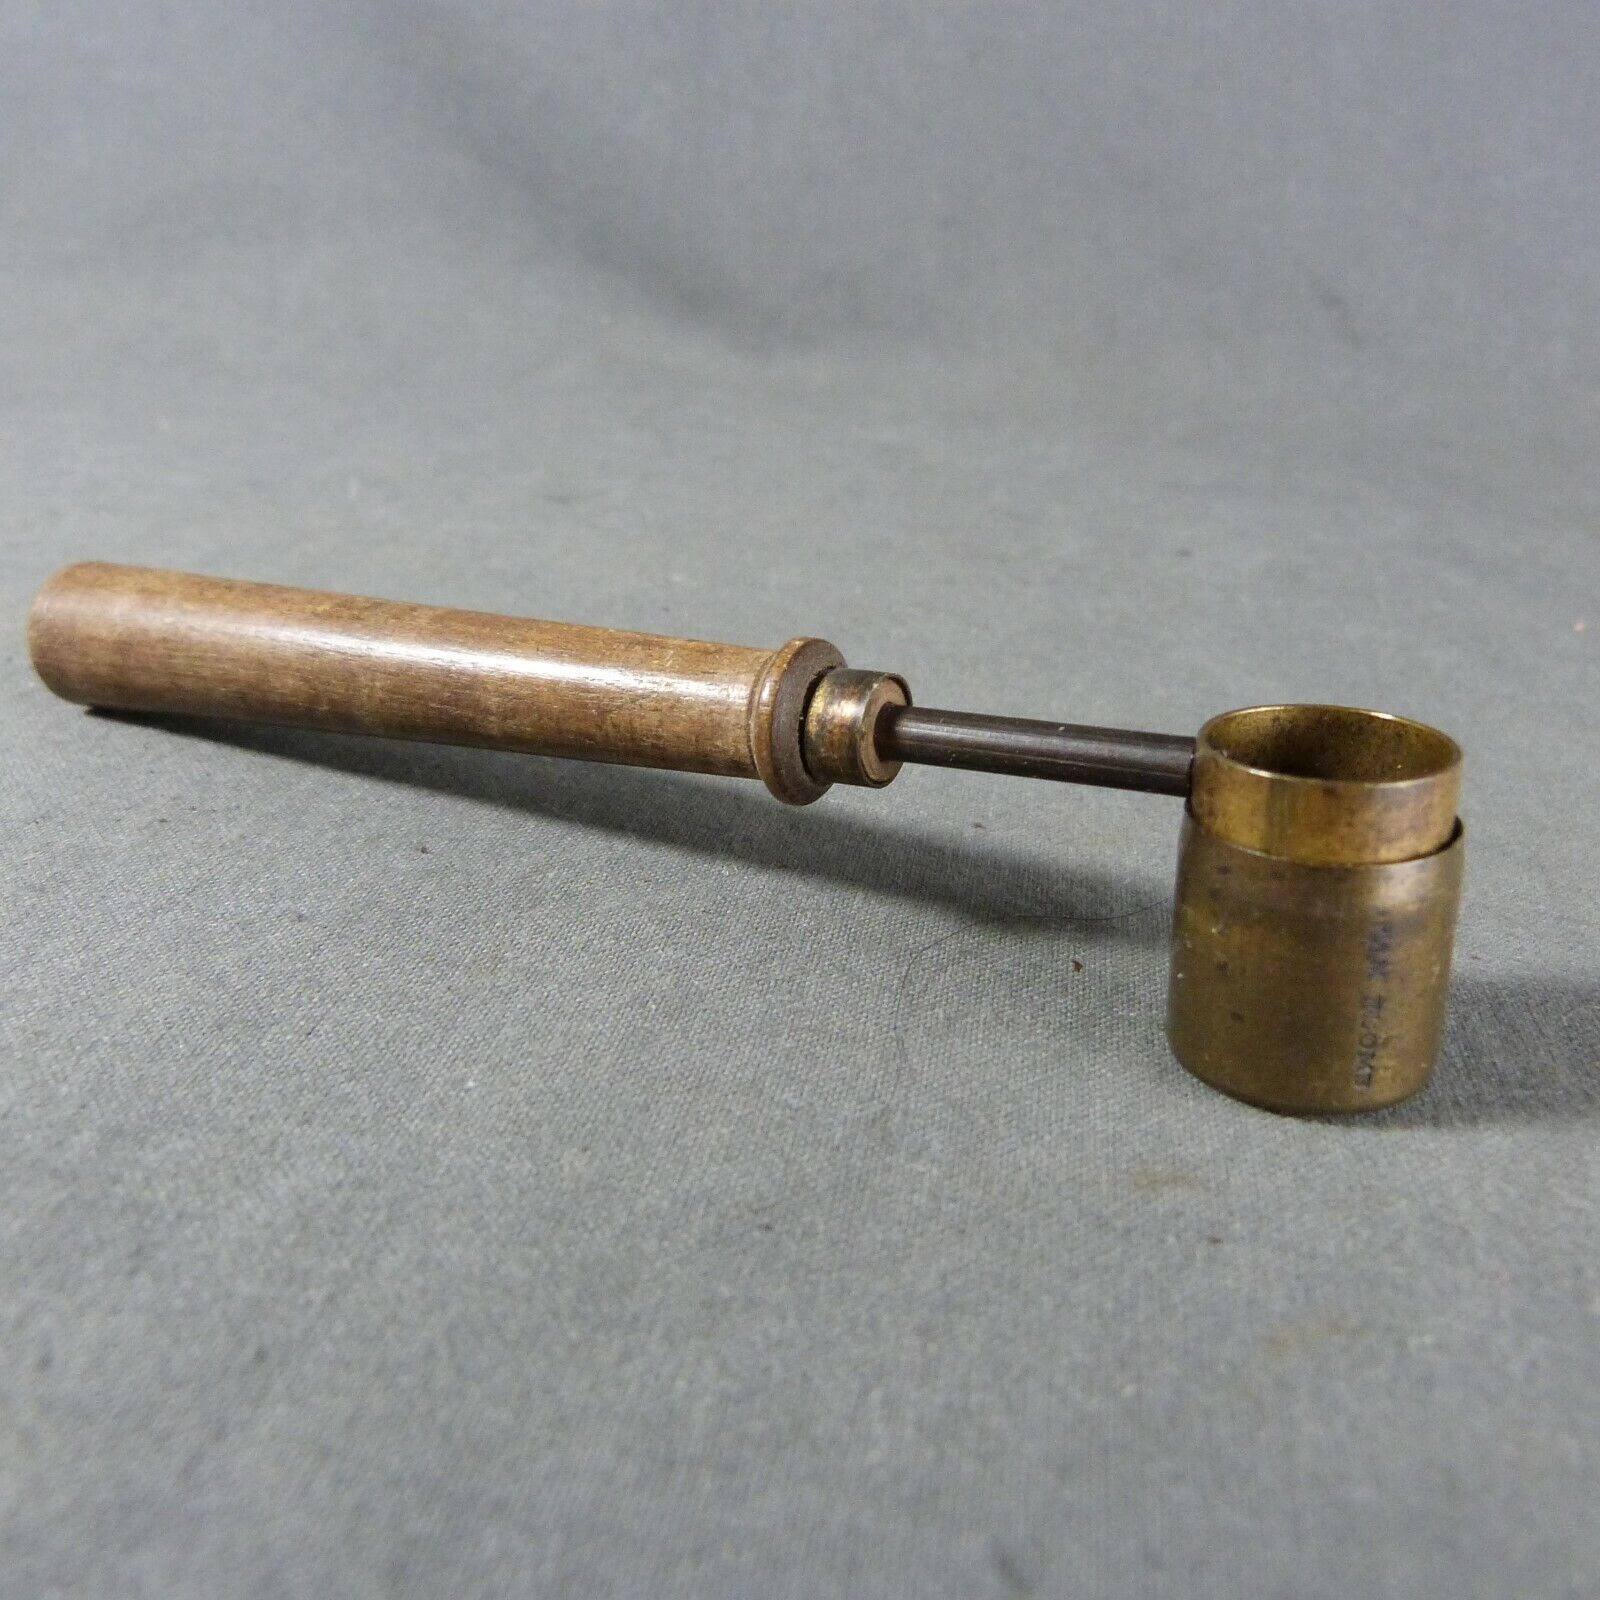 Antique French Brass Powder Measure Adjustable Tool Wood Handle -